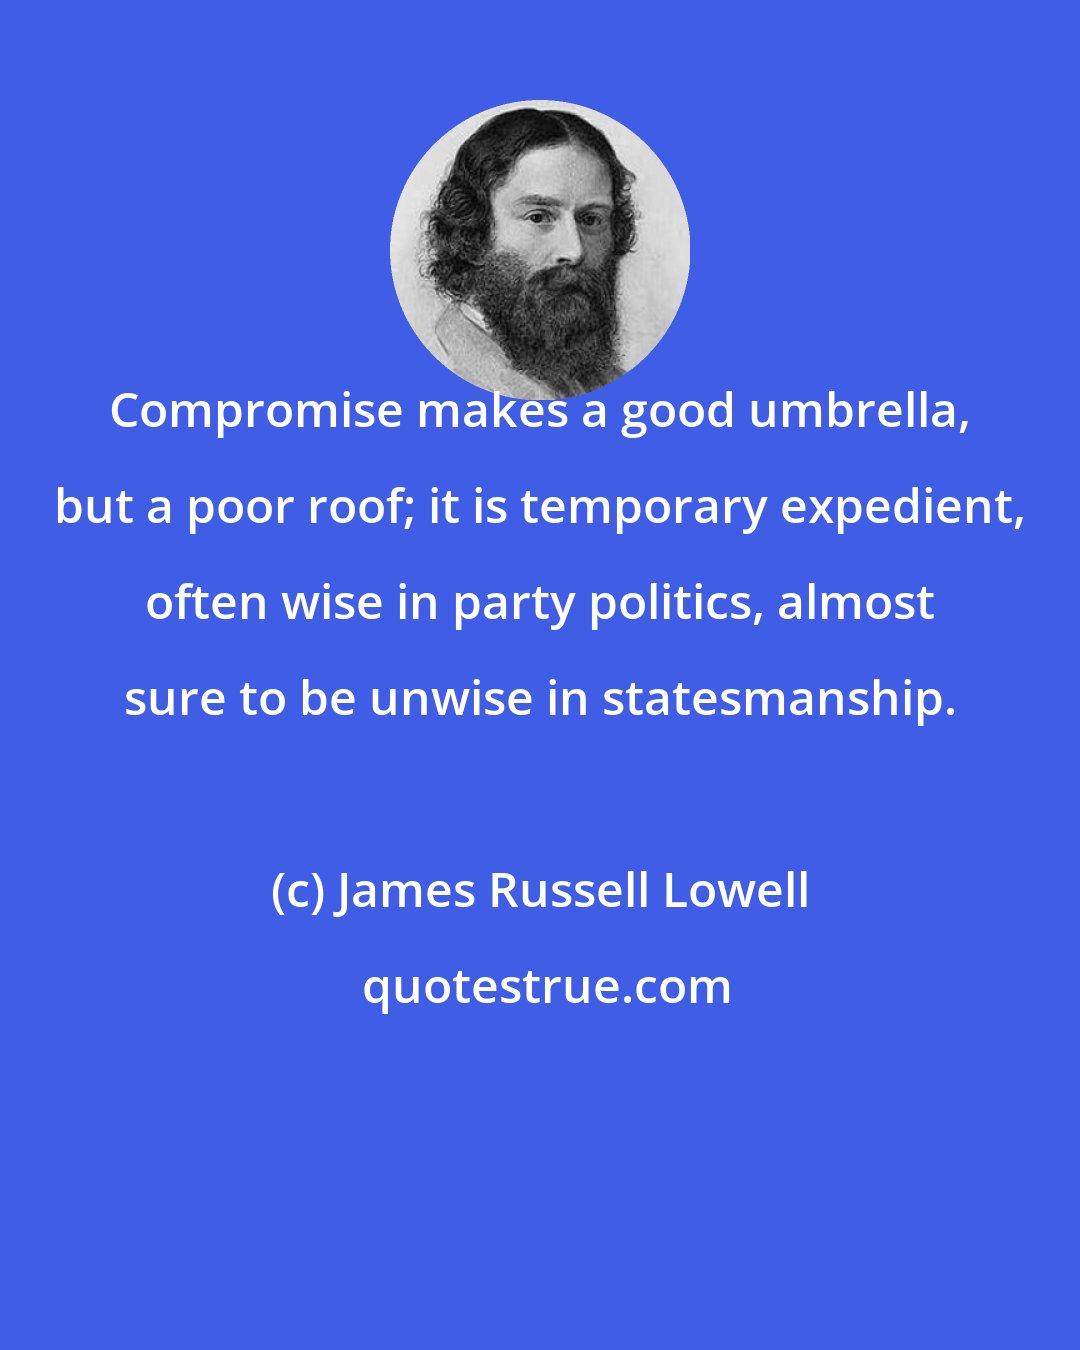 James Russell Lowell: Compromise makes a good umbrella, but a poor roof; it is temporary expedient, often wise in party politics, almost sure to be unwise in statesmanship.